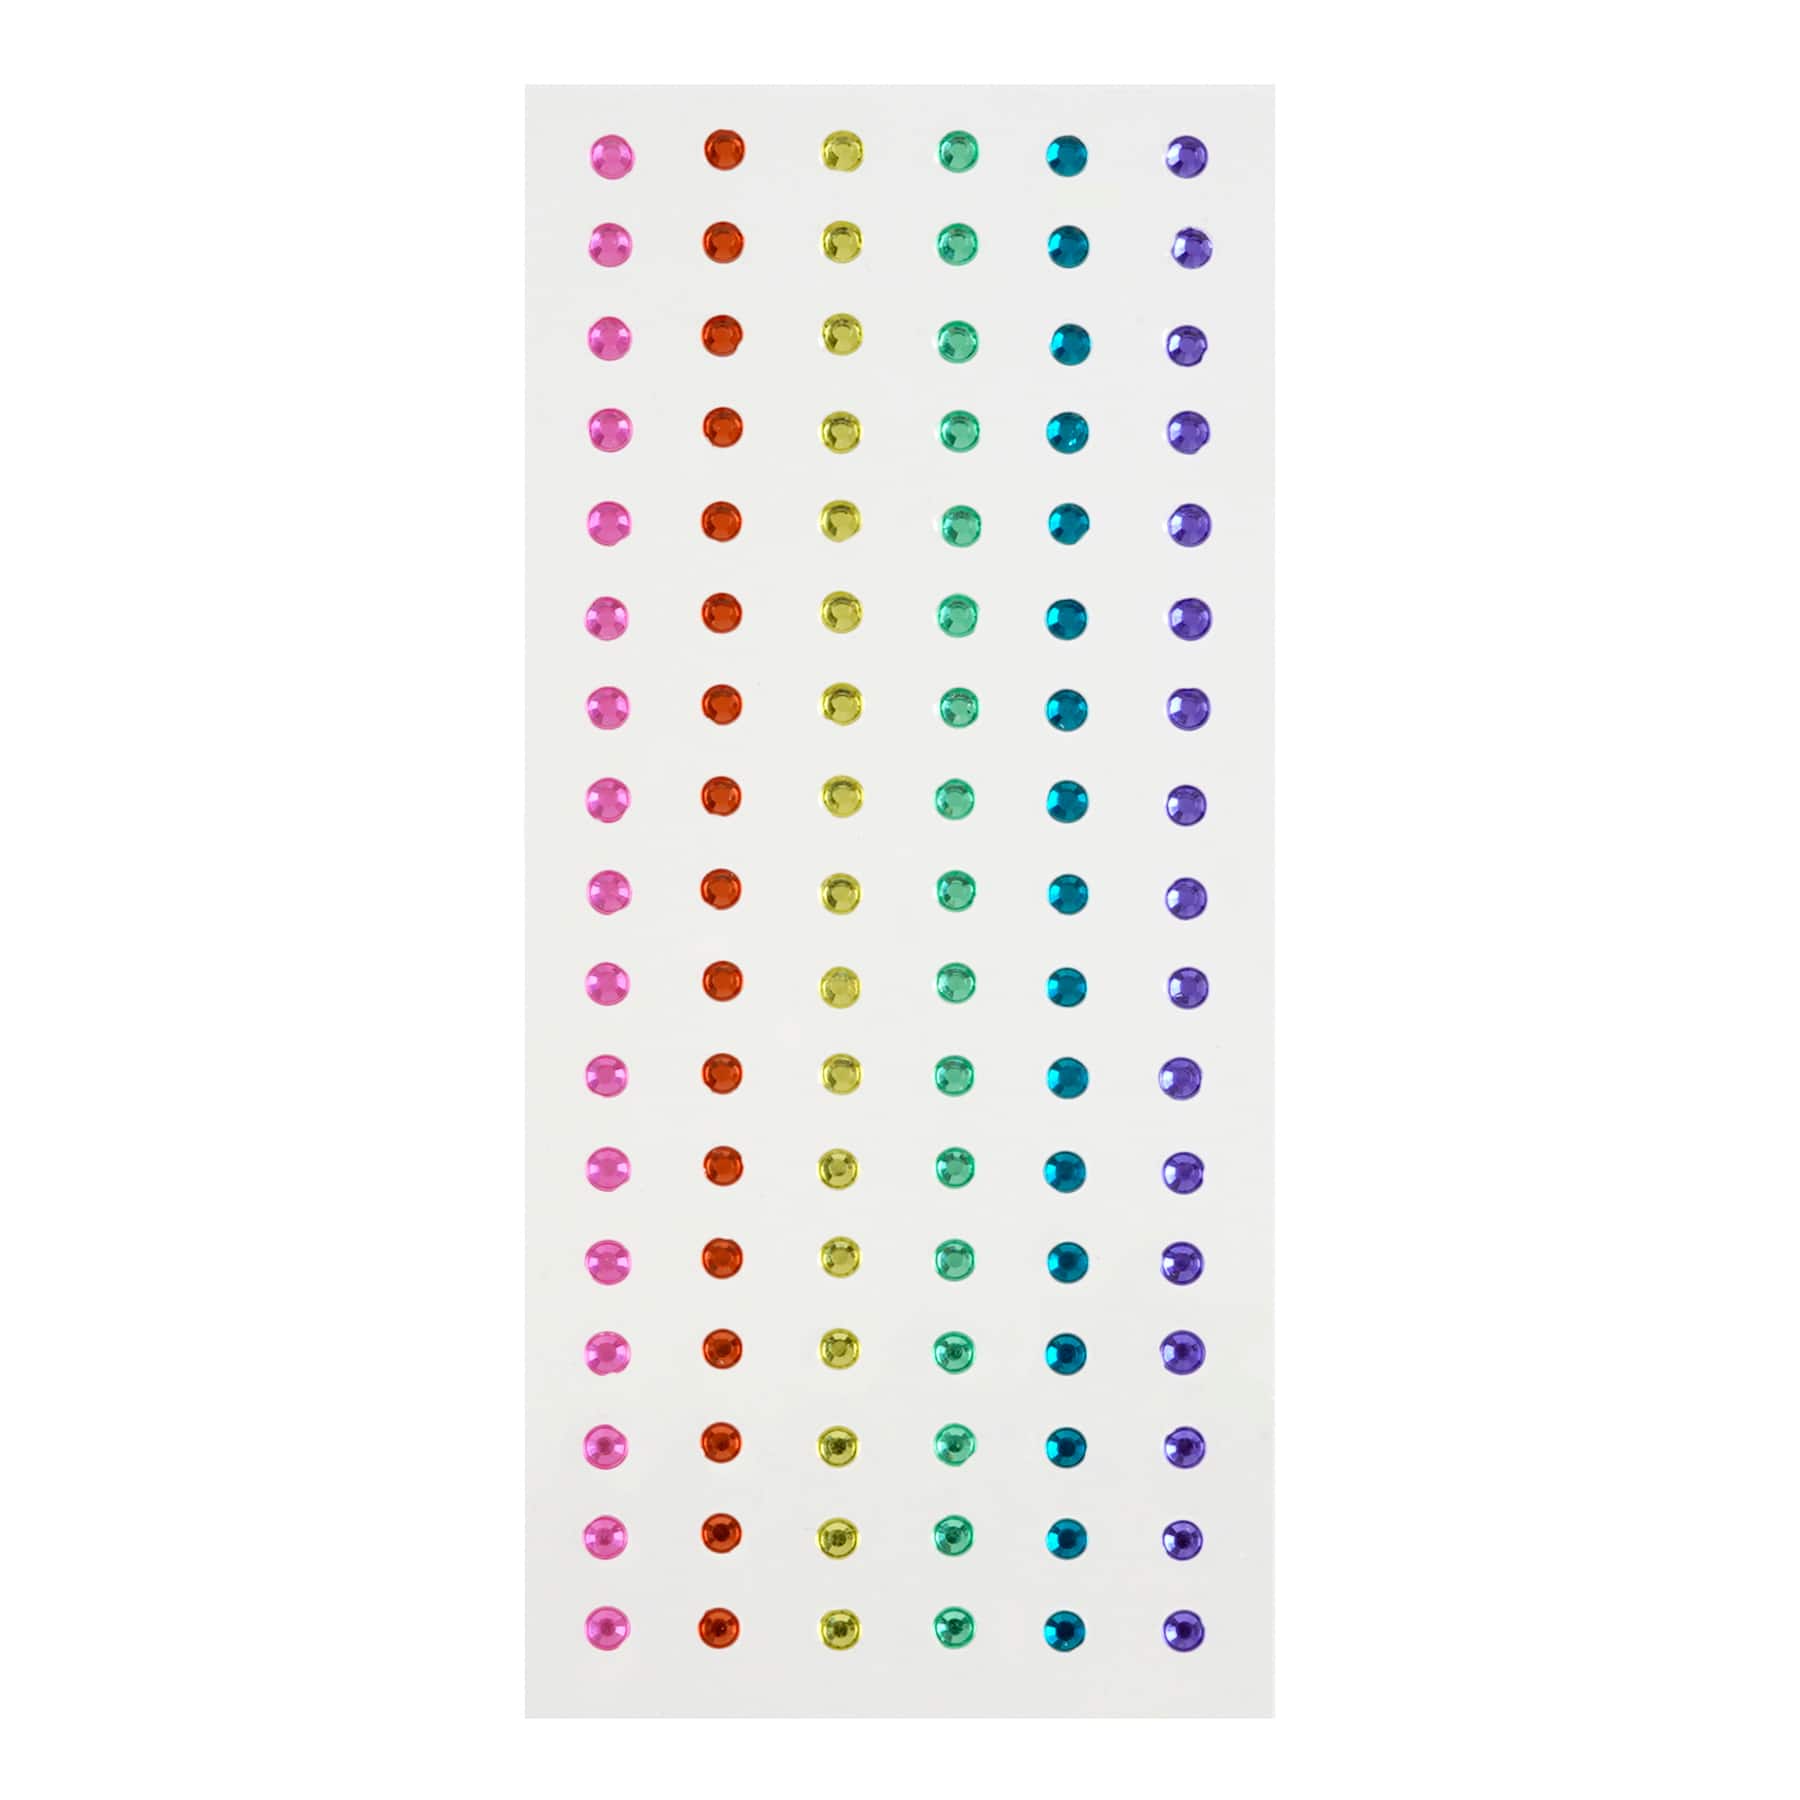 12 Packs: 102 ct. (1,224 total) Multicolored Rhinestone Stickers by Recollections&#x2122;